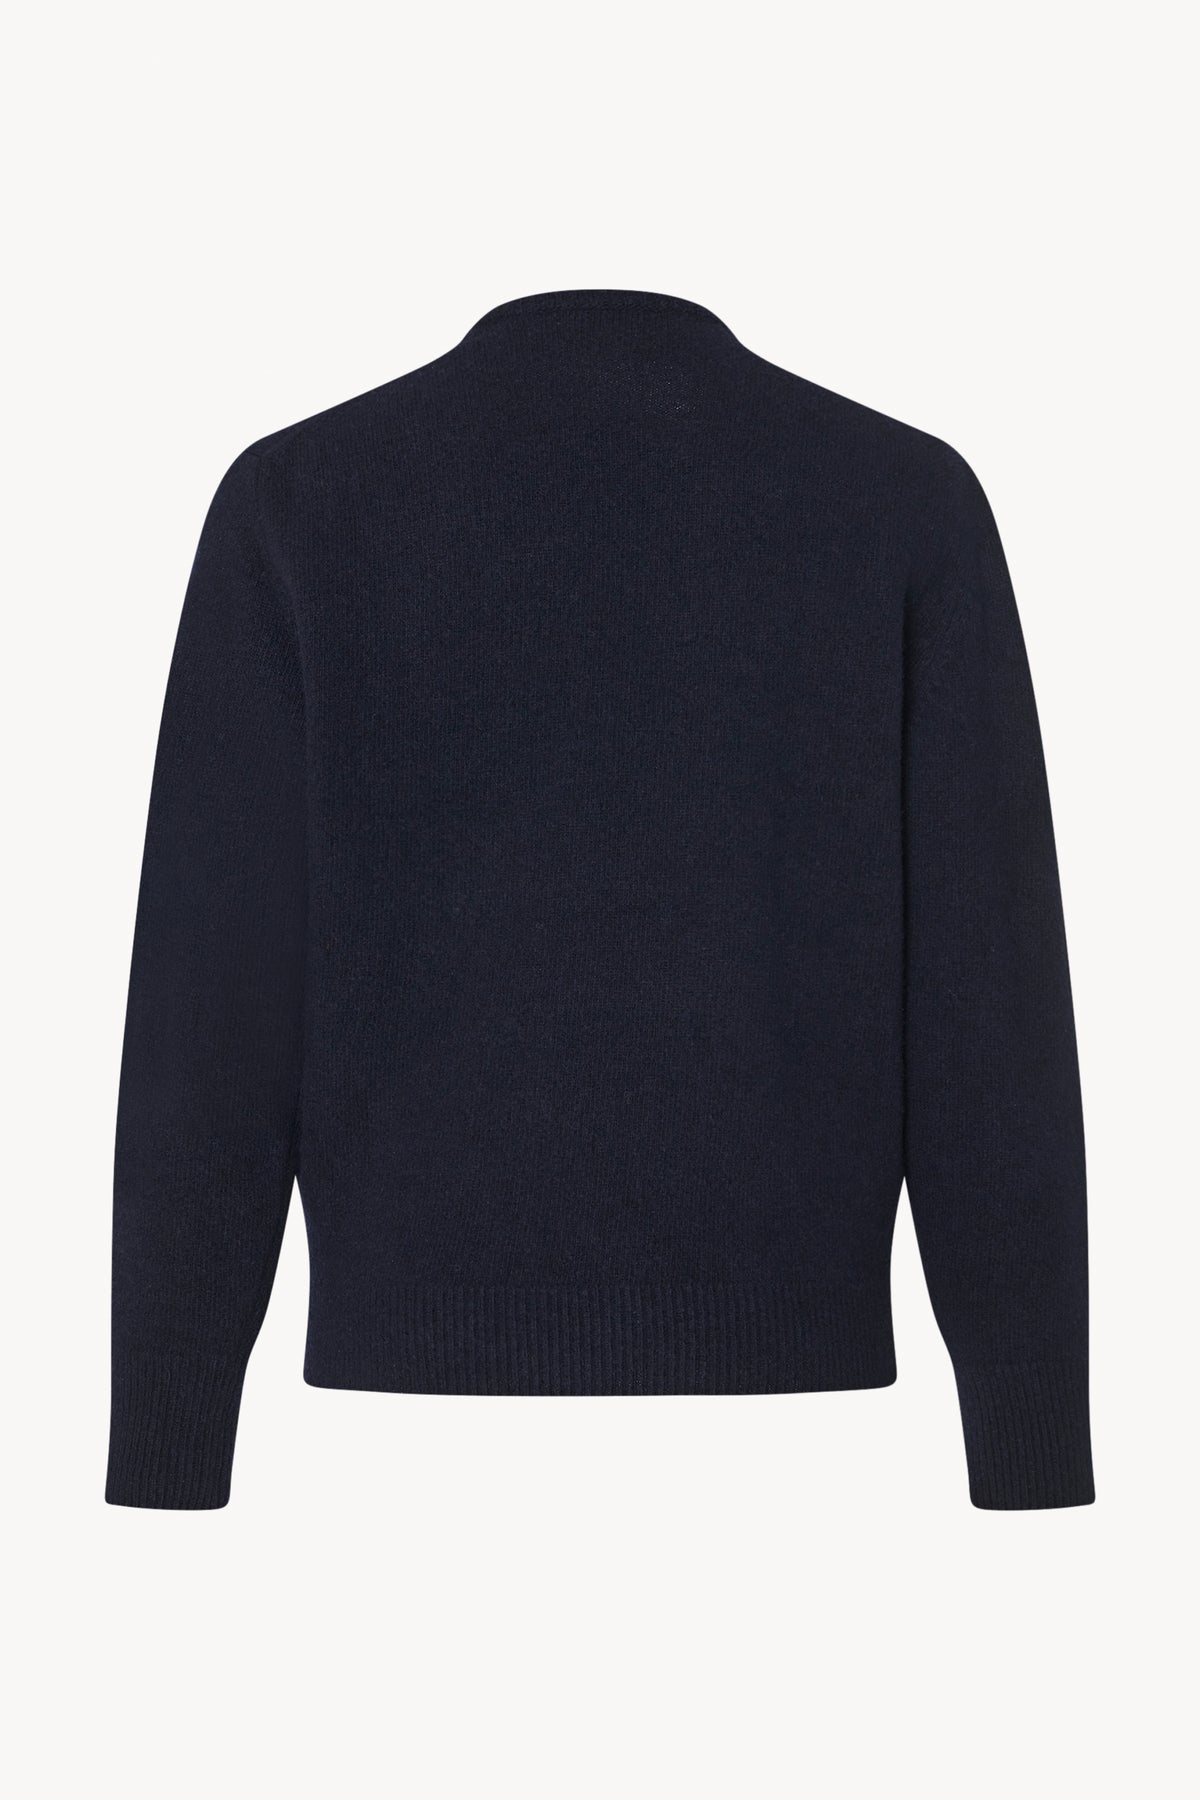 Enid Top in Merino Wool and Cashmere